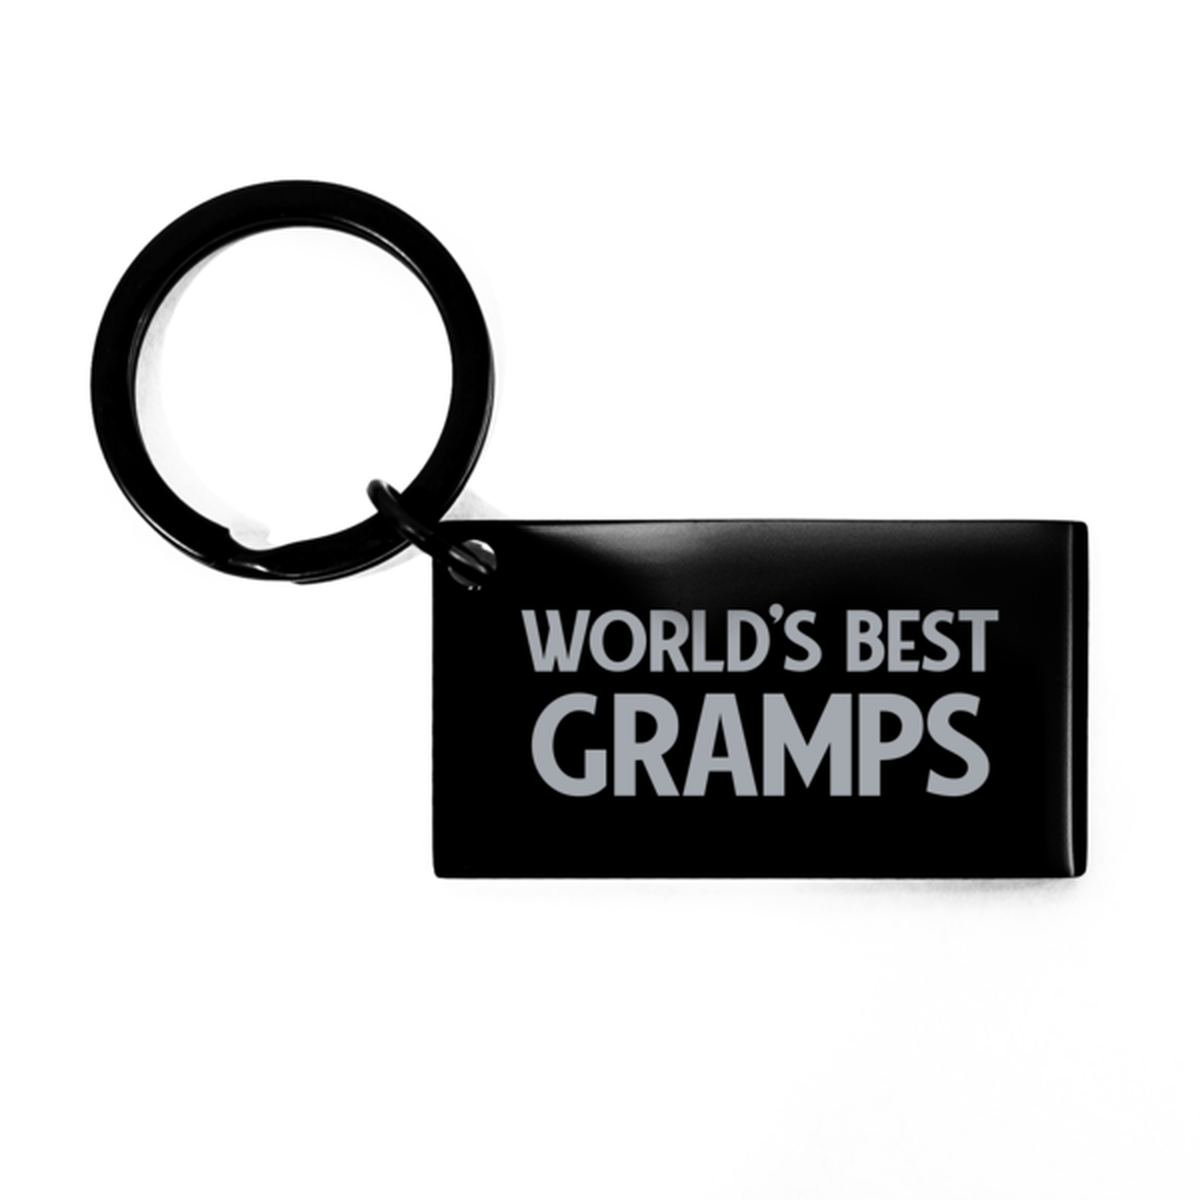 Worlds Best Gramps Gifts, Funny Black Engraved Keychain For Gramps, Birthday Presents For Women